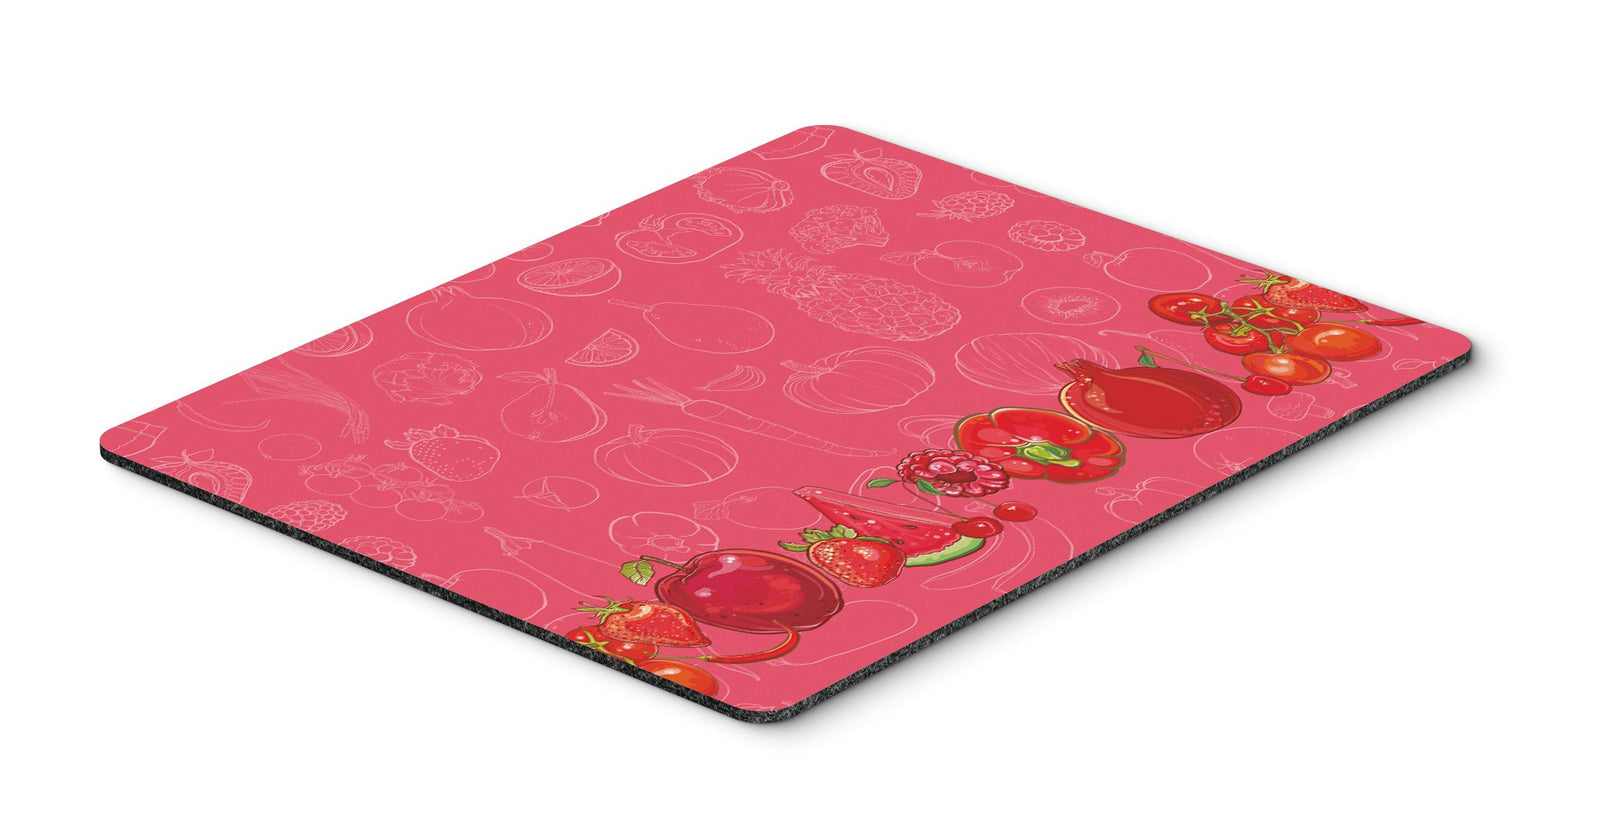 Fruits and Vegetables in Red Mouse Pad, Hot Pad or Trivet BB5133MP by Caroline's Treasures